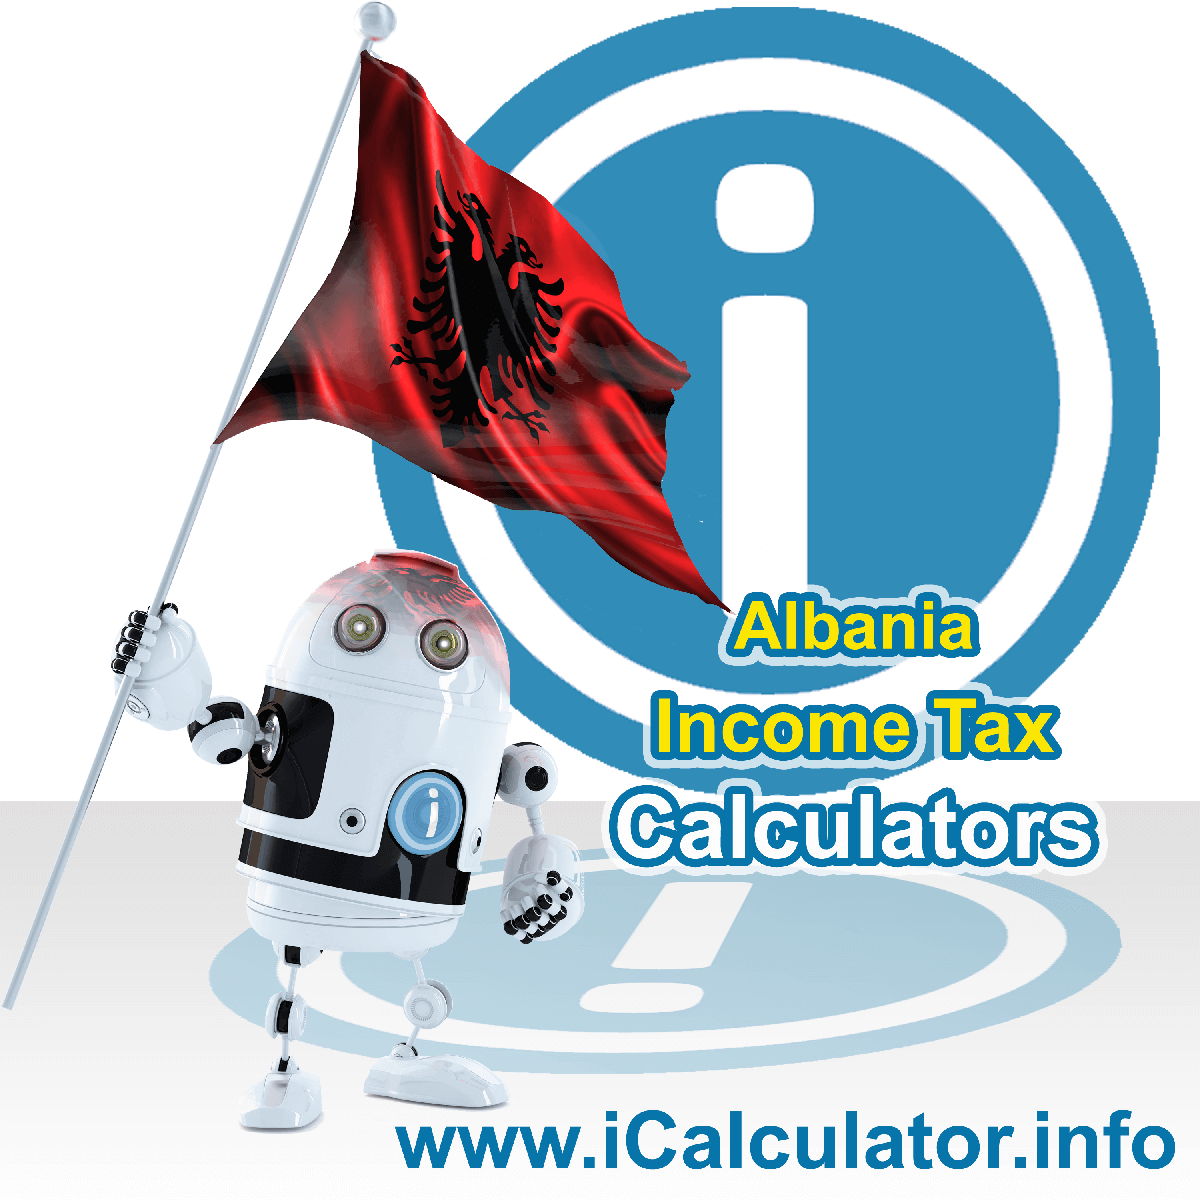 Albania Income Tax Calculator. This image shows a new employer in Albania calculating the annual payroll costs based on multiple payroll payments in one year in Albania using the Albania income tax calculator to understand their payroll costs in Albania in 2022